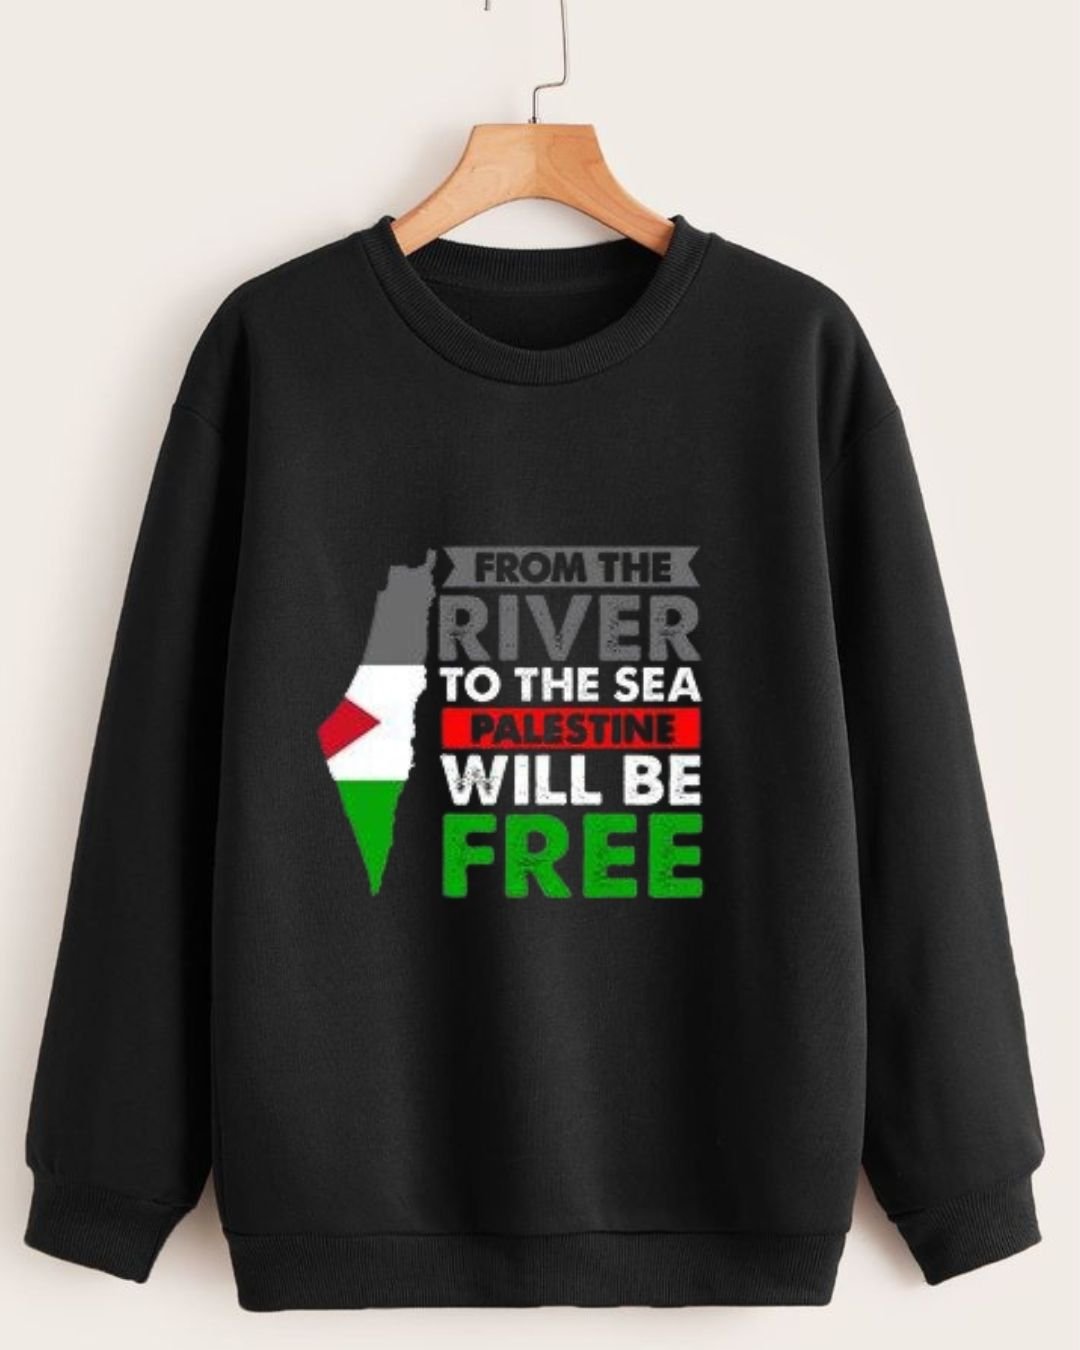 justice-for-palestine-sweat-shirt